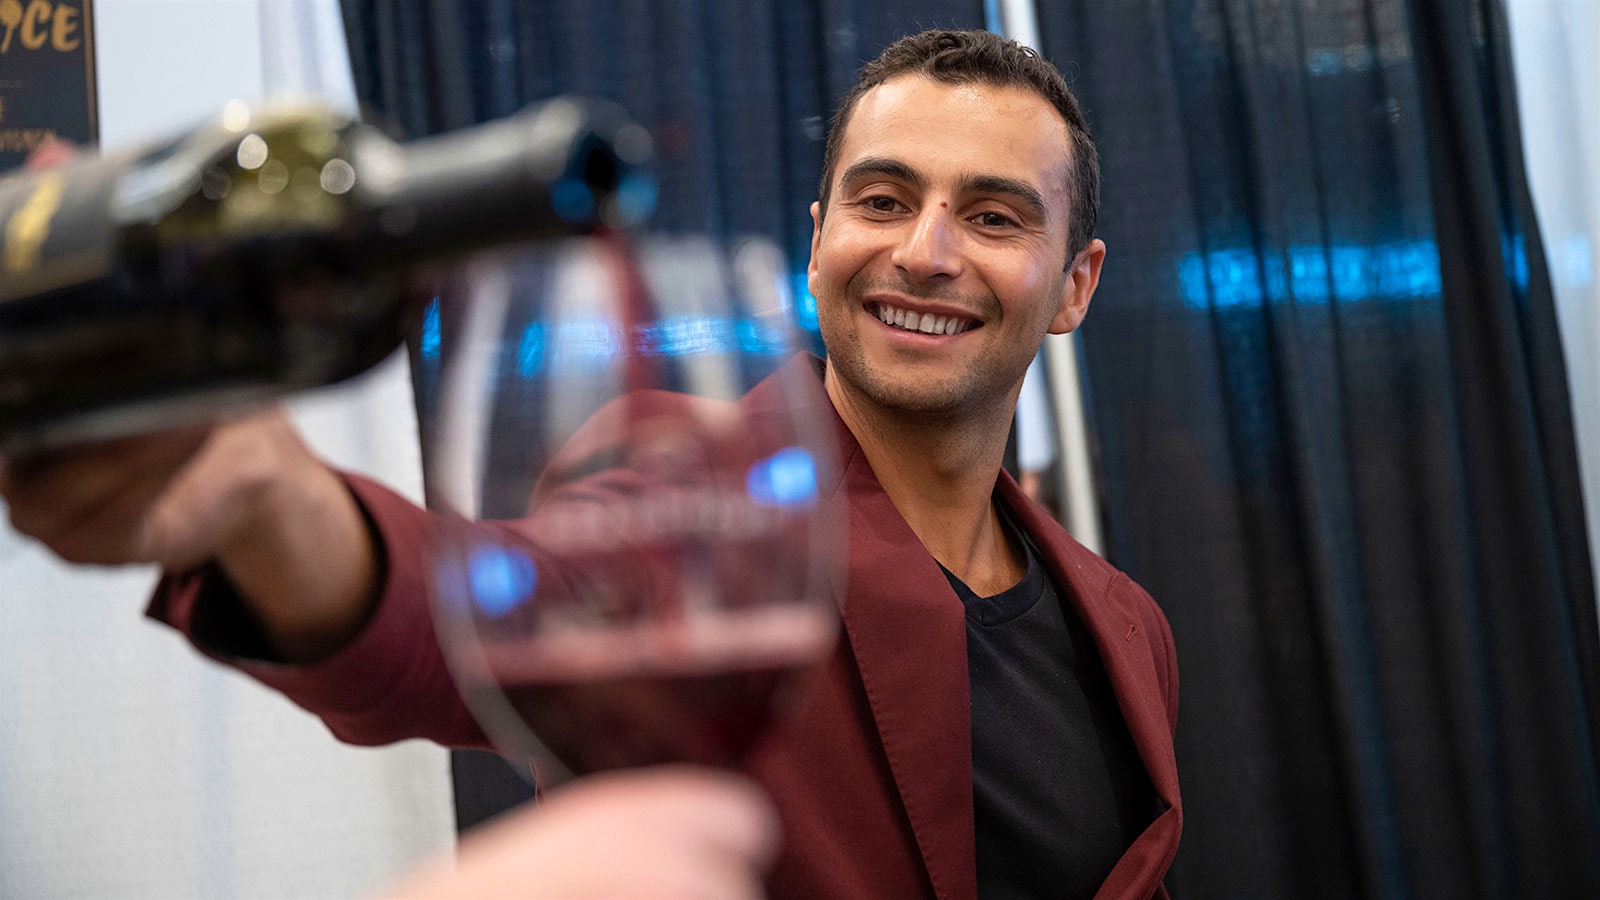  Portrait of The Vice co-founder and winemaker Malek Amrani pouring a 2019 Napa Cab